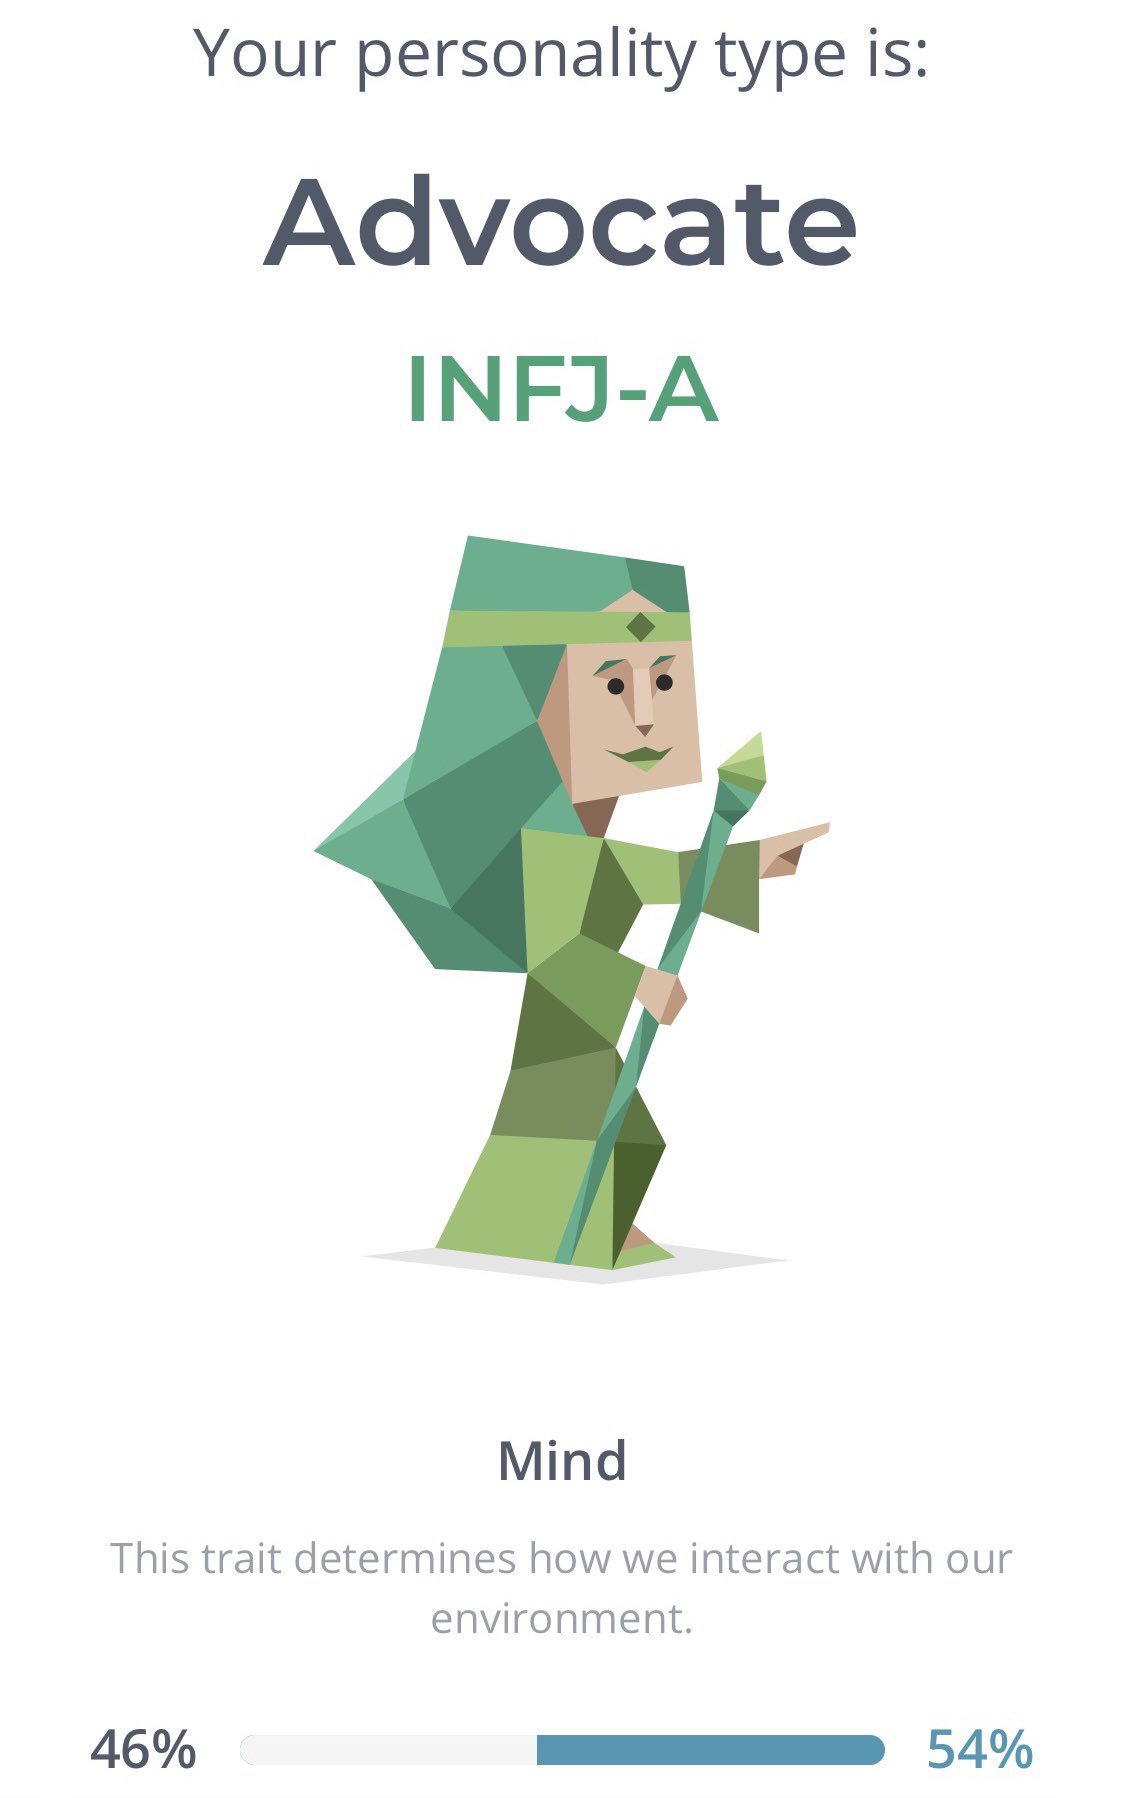 MBTI - A Look at the INFJ